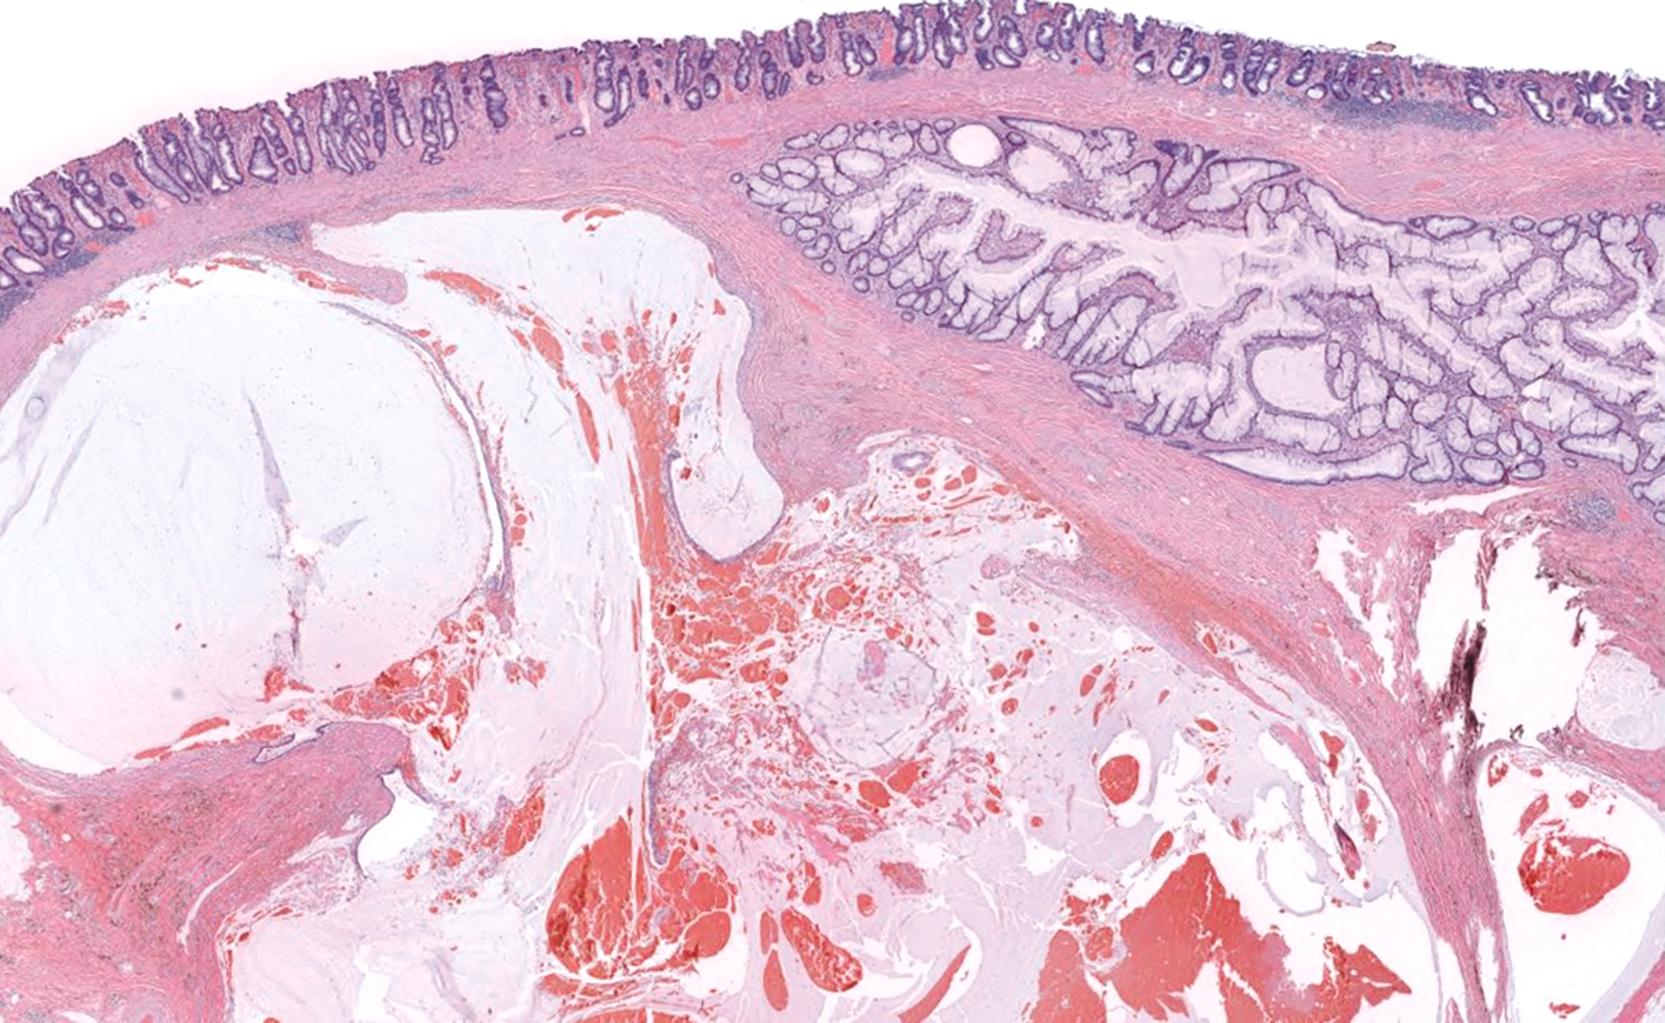 FIGURE 32.6, Low-power view of typical histological findings in proctitis cystica profunda in which well-circumscribed nests of misplaced rectal epithelium and pools of extracellular mucin are seen in the submucosa. This misplaced epithelium is invested by lamina propria, with a surrounding stroma that may show hemorrhage and associated hemosiderin-laden macrophages.